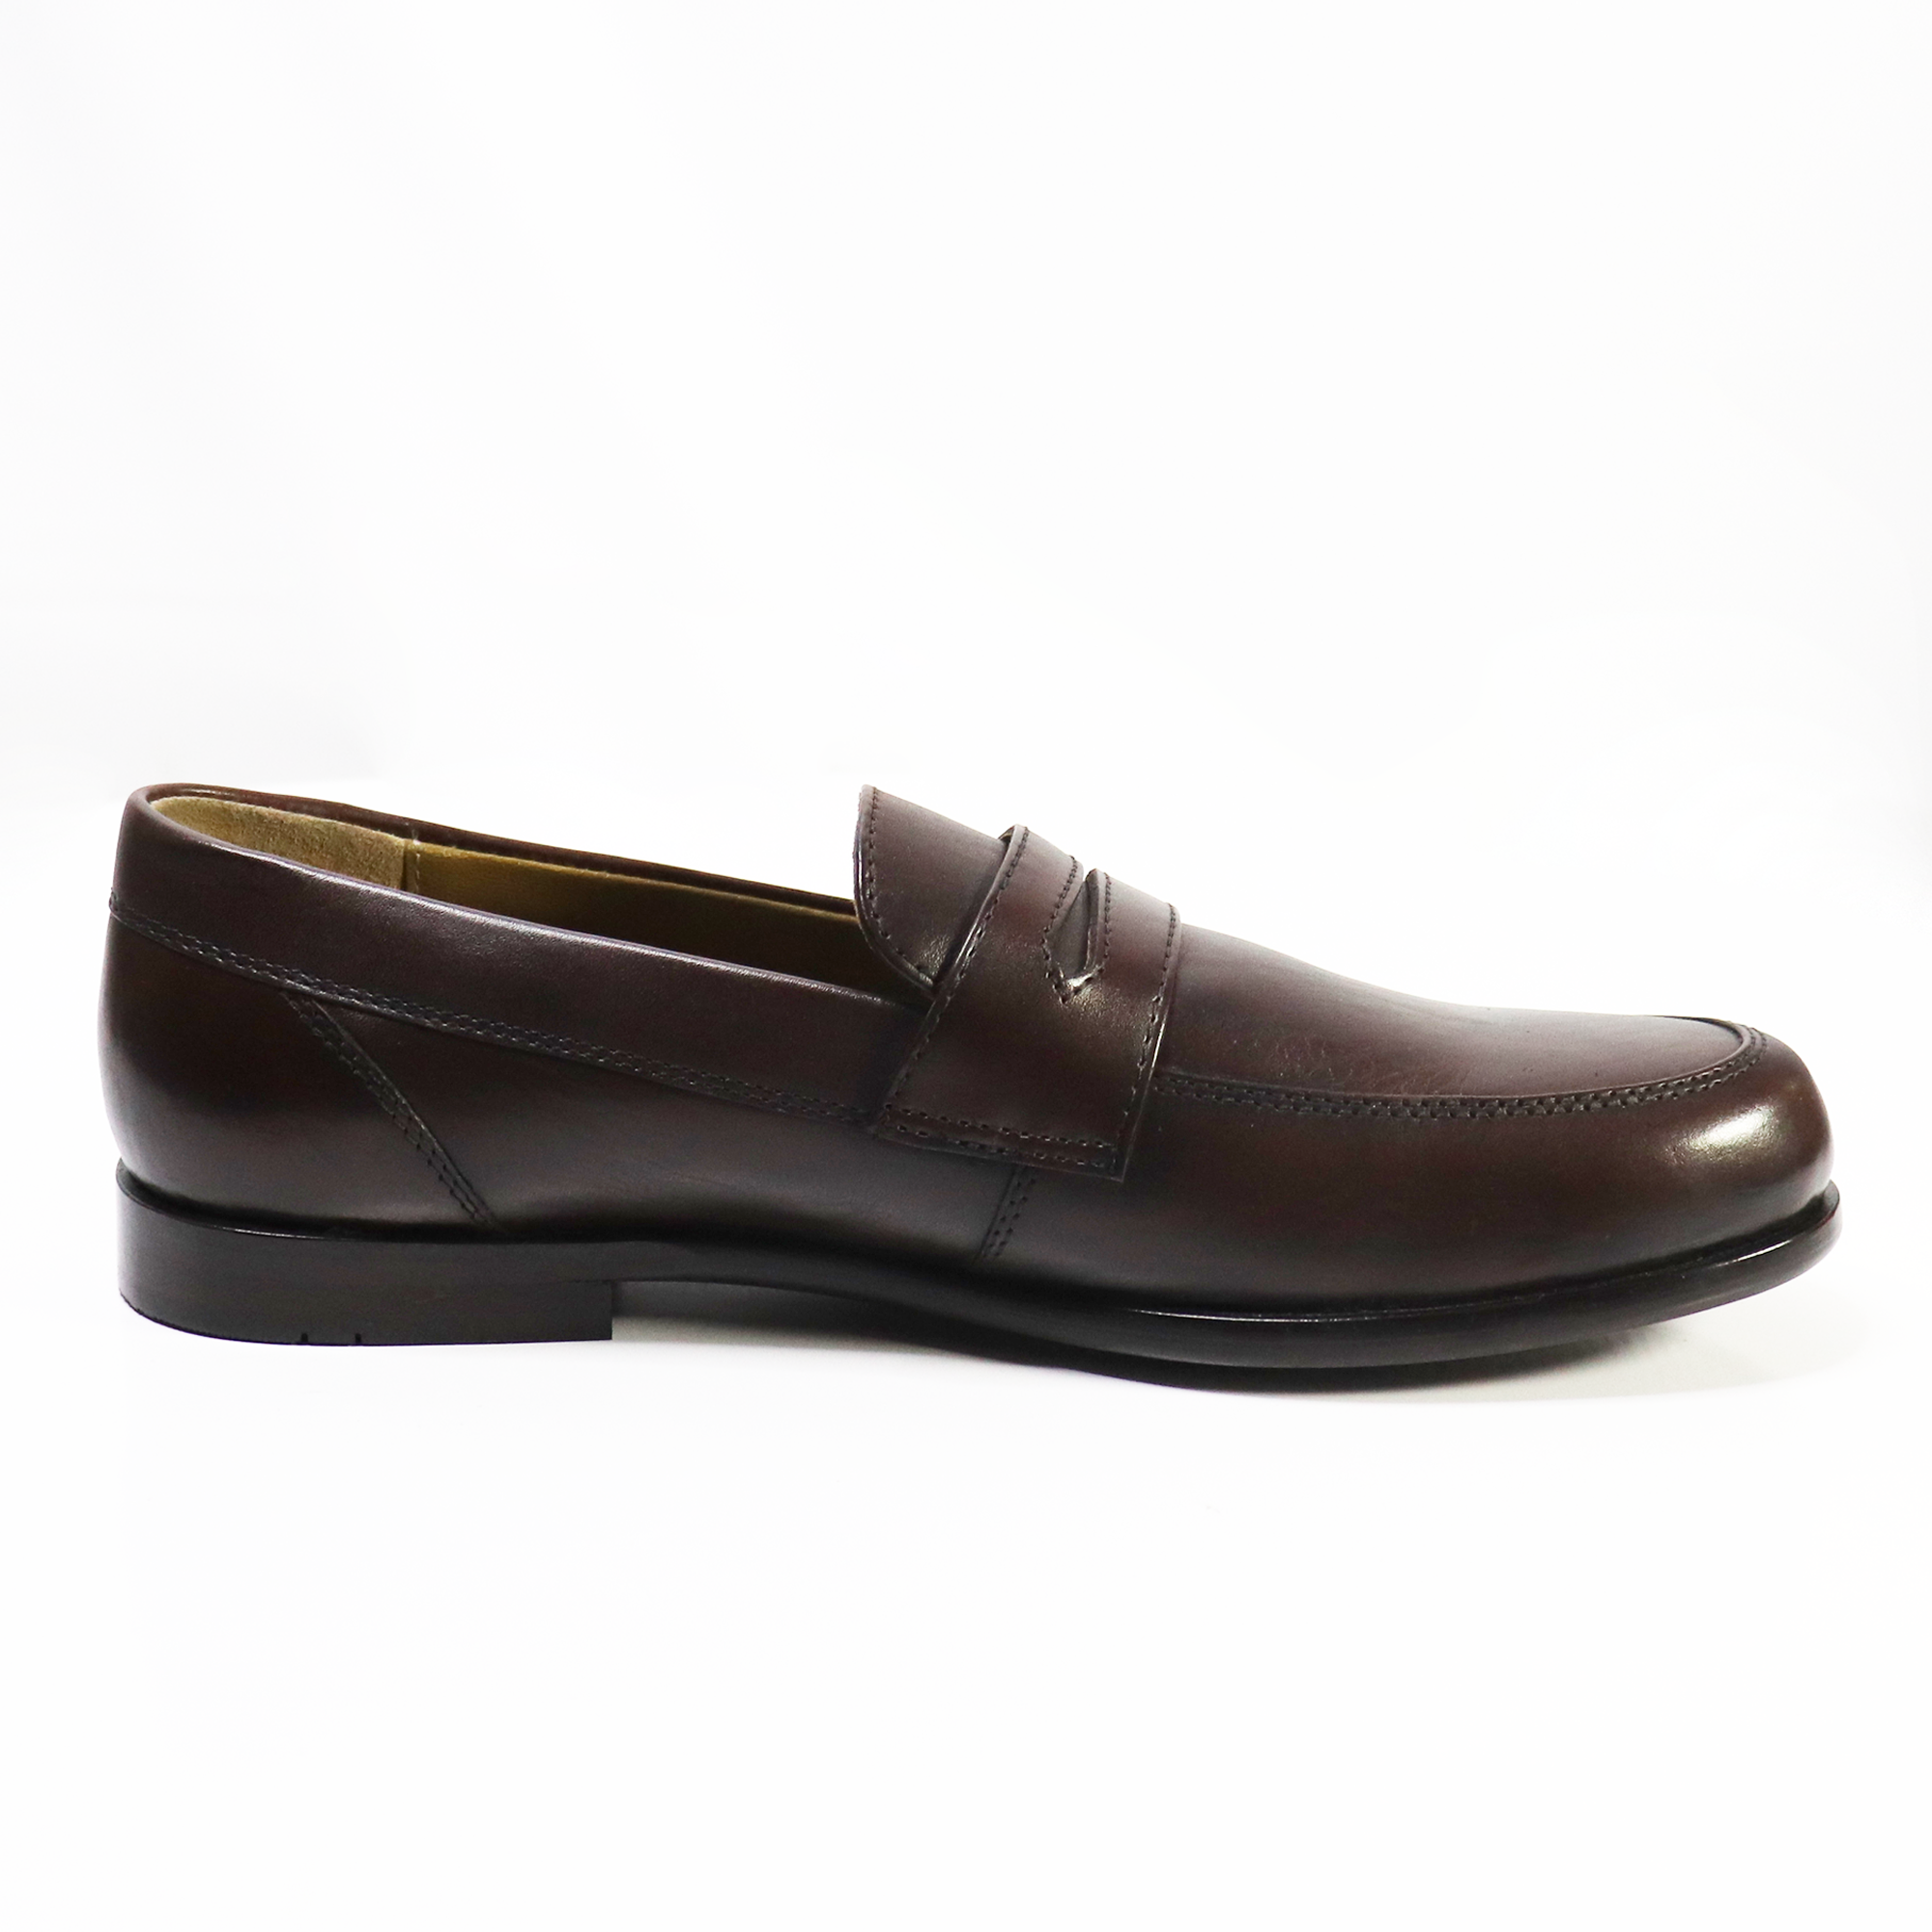 Men's Penny Lasted Genuine Leather Shoes Hand Crafted to perfection by renowned Mont Hawk Artisans. Loafers/Slip On